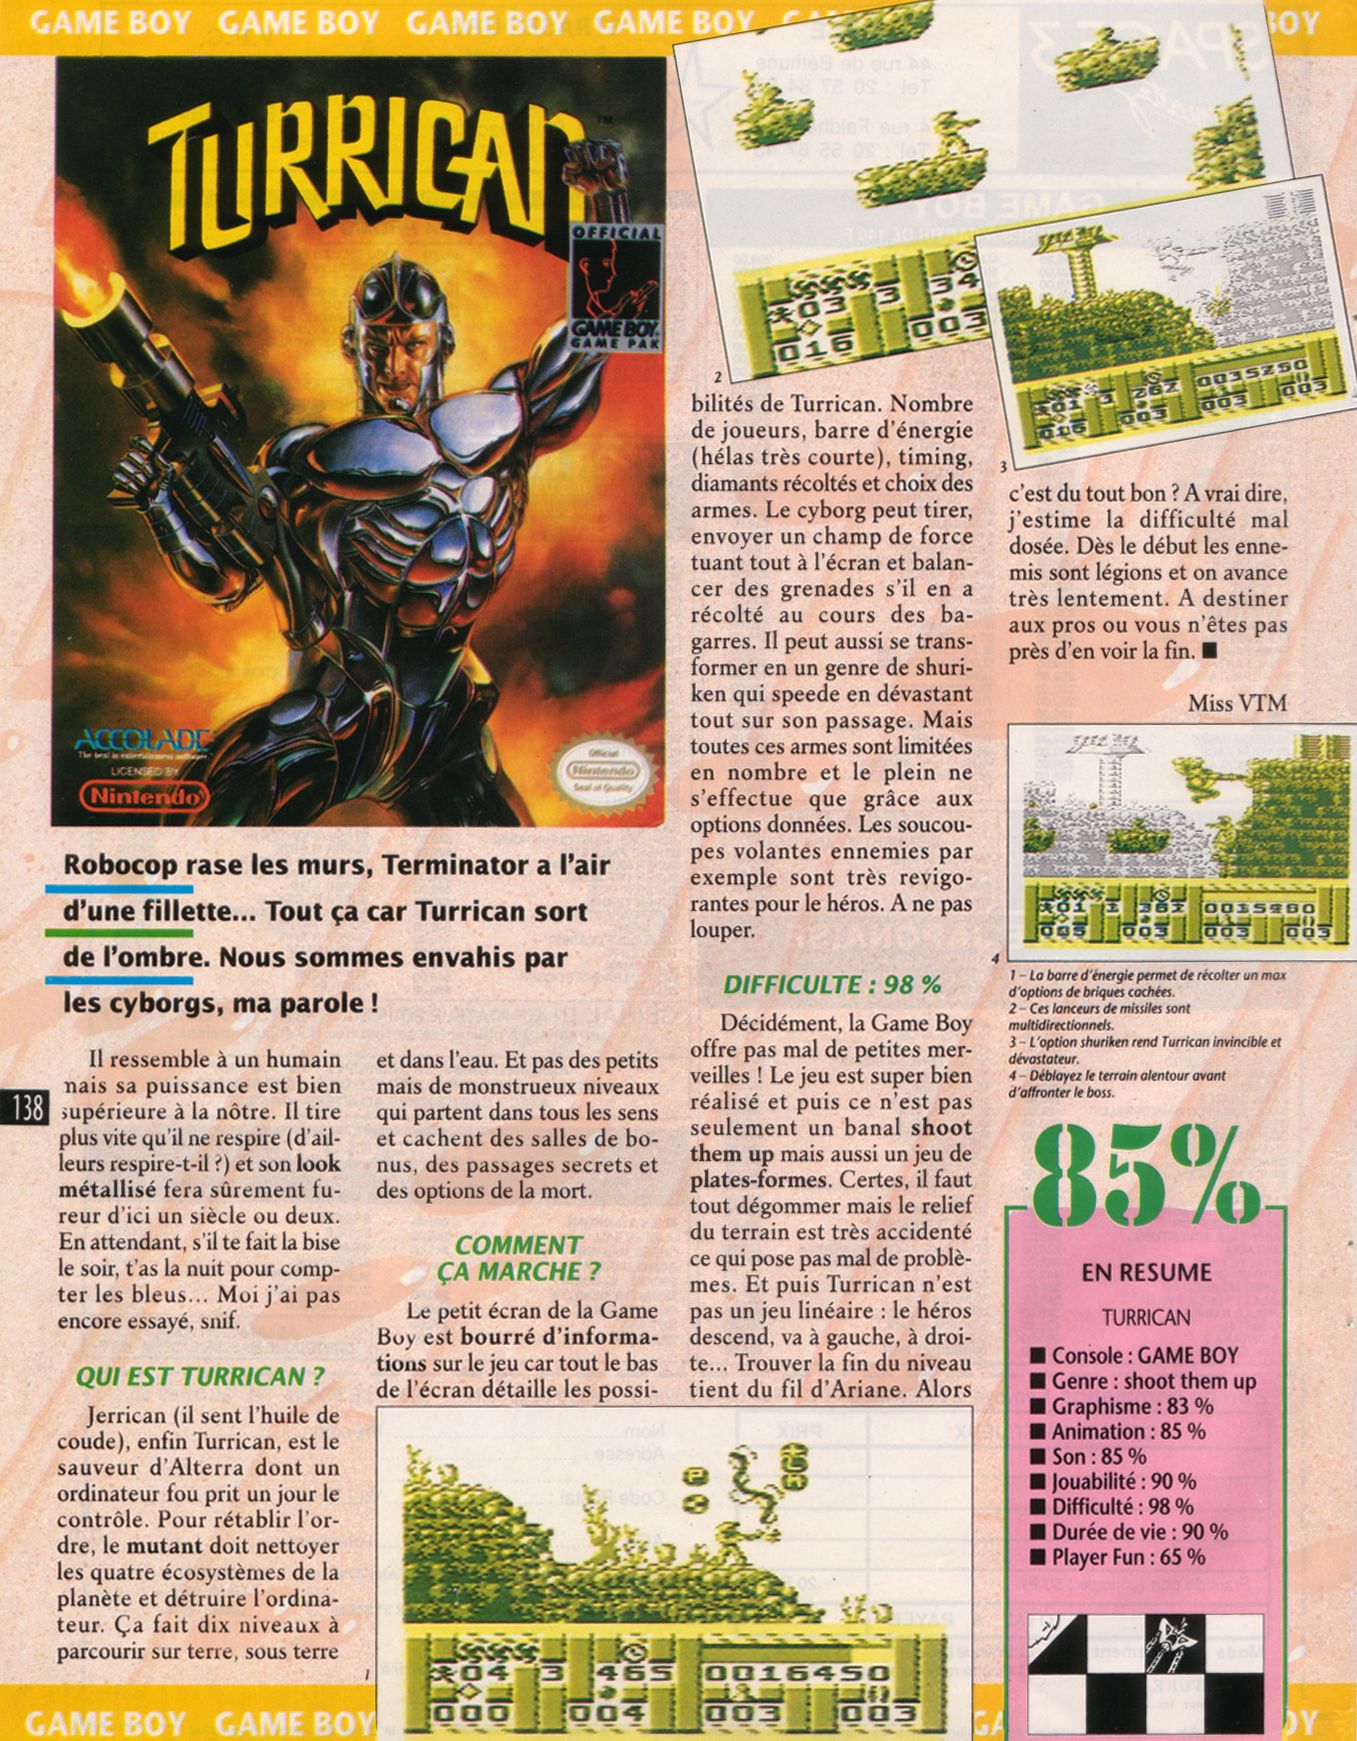 tests//1264/Player One 022 - Page 138 (1992-07-08).jpg